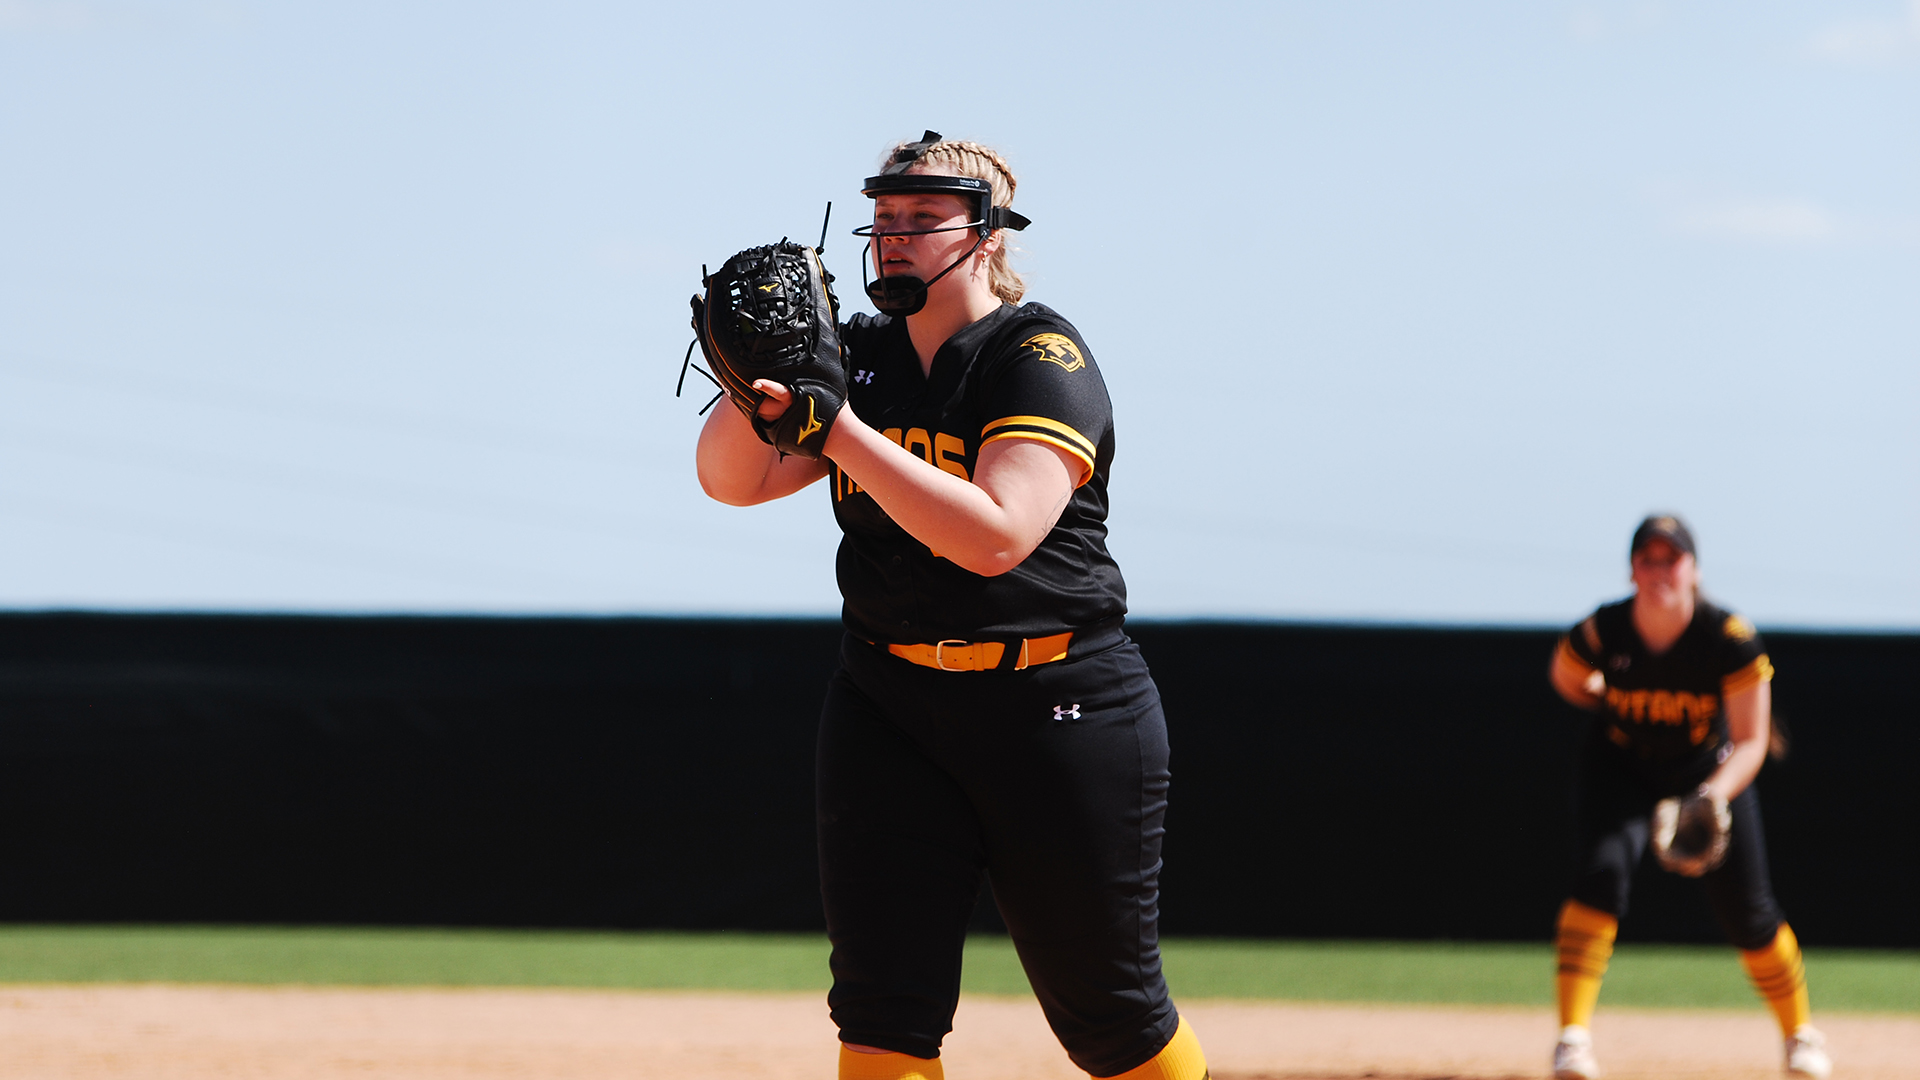 Sydney Nemetz earned a pair of saves by pitching 3.1 scoreless innings against the Ephs and Pioneers.